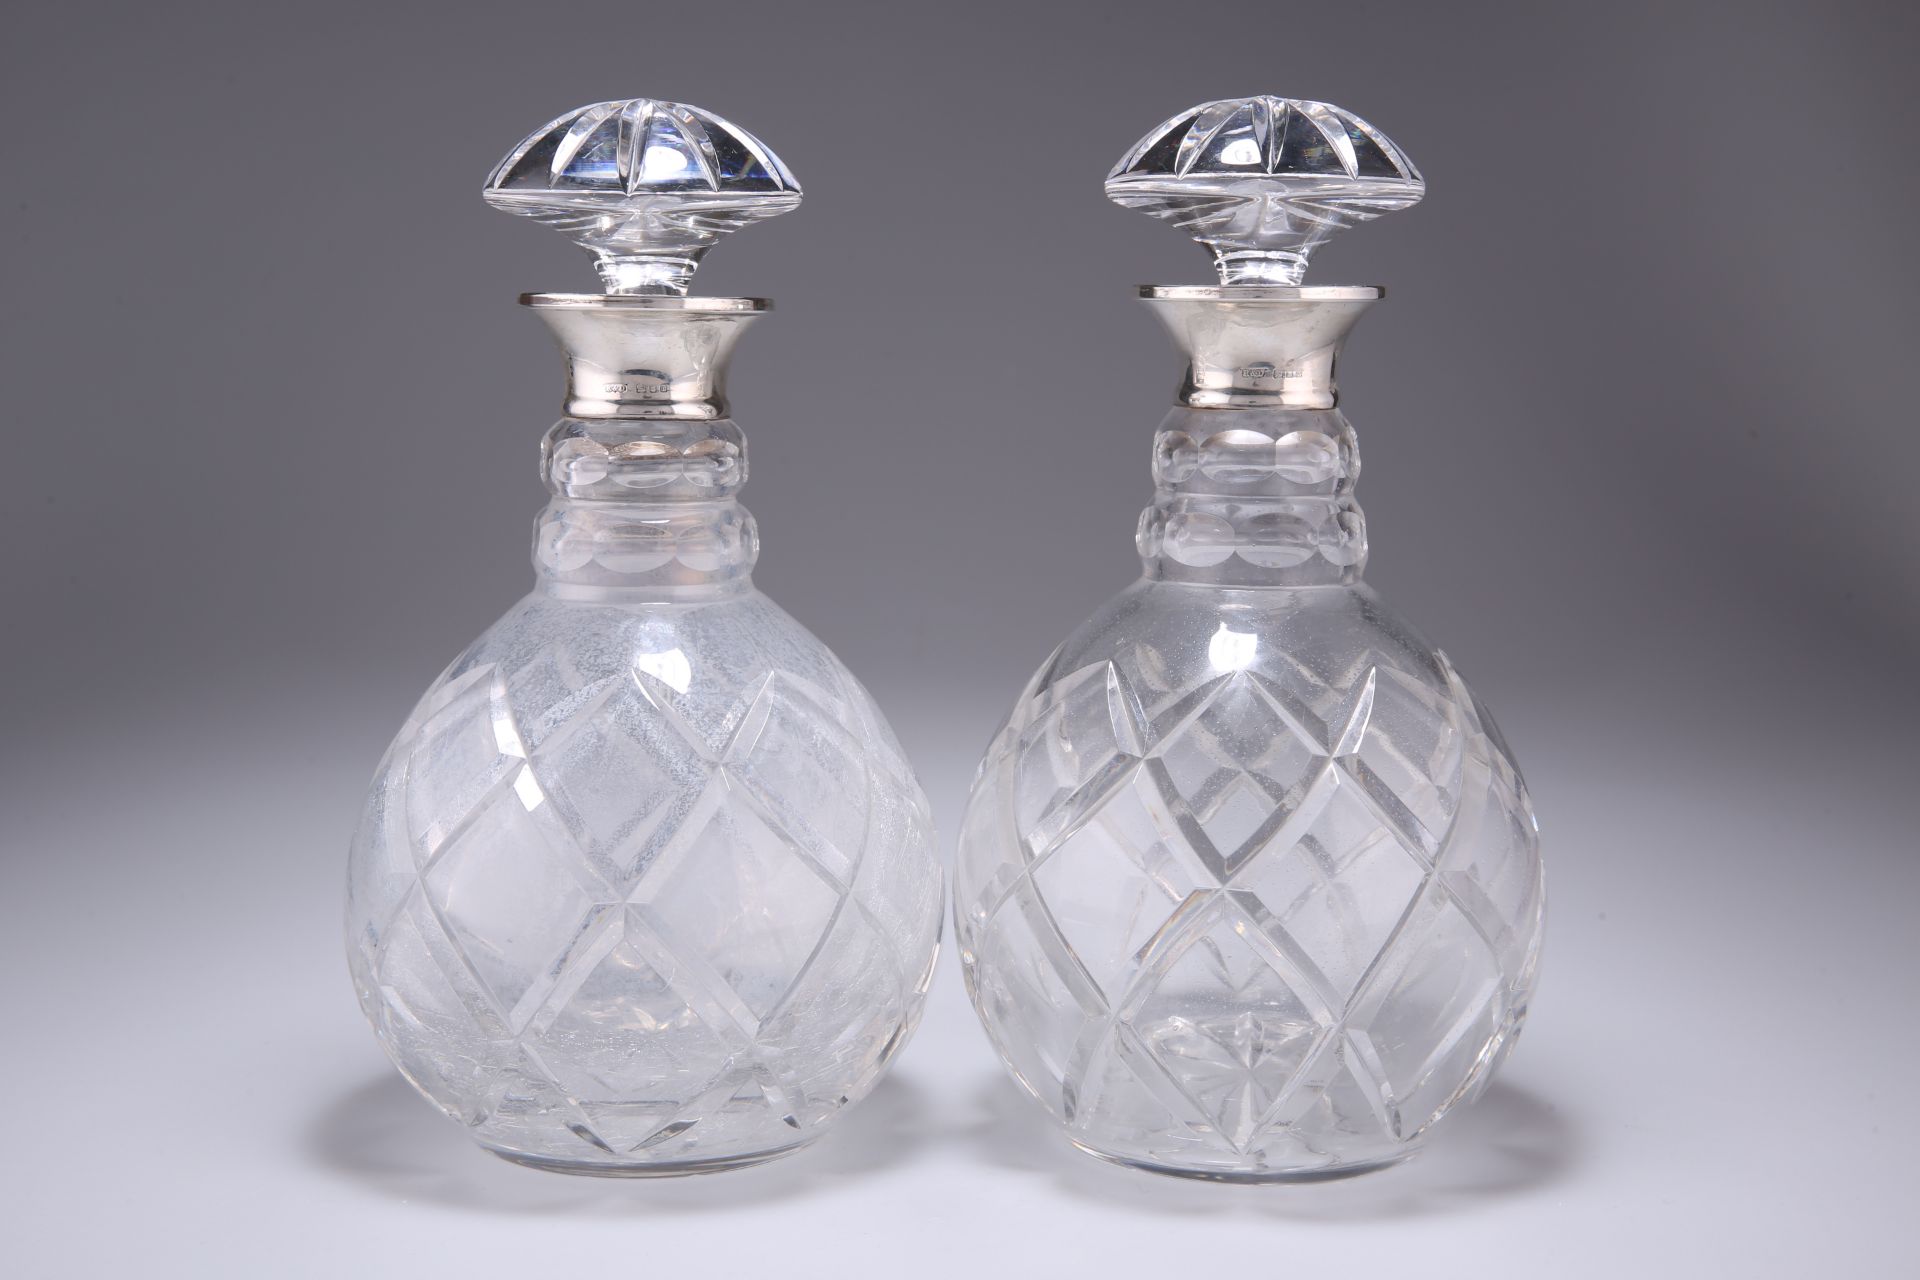 A PAIR OF ELIZABETH II SILVER-COLLARED DECANTERS